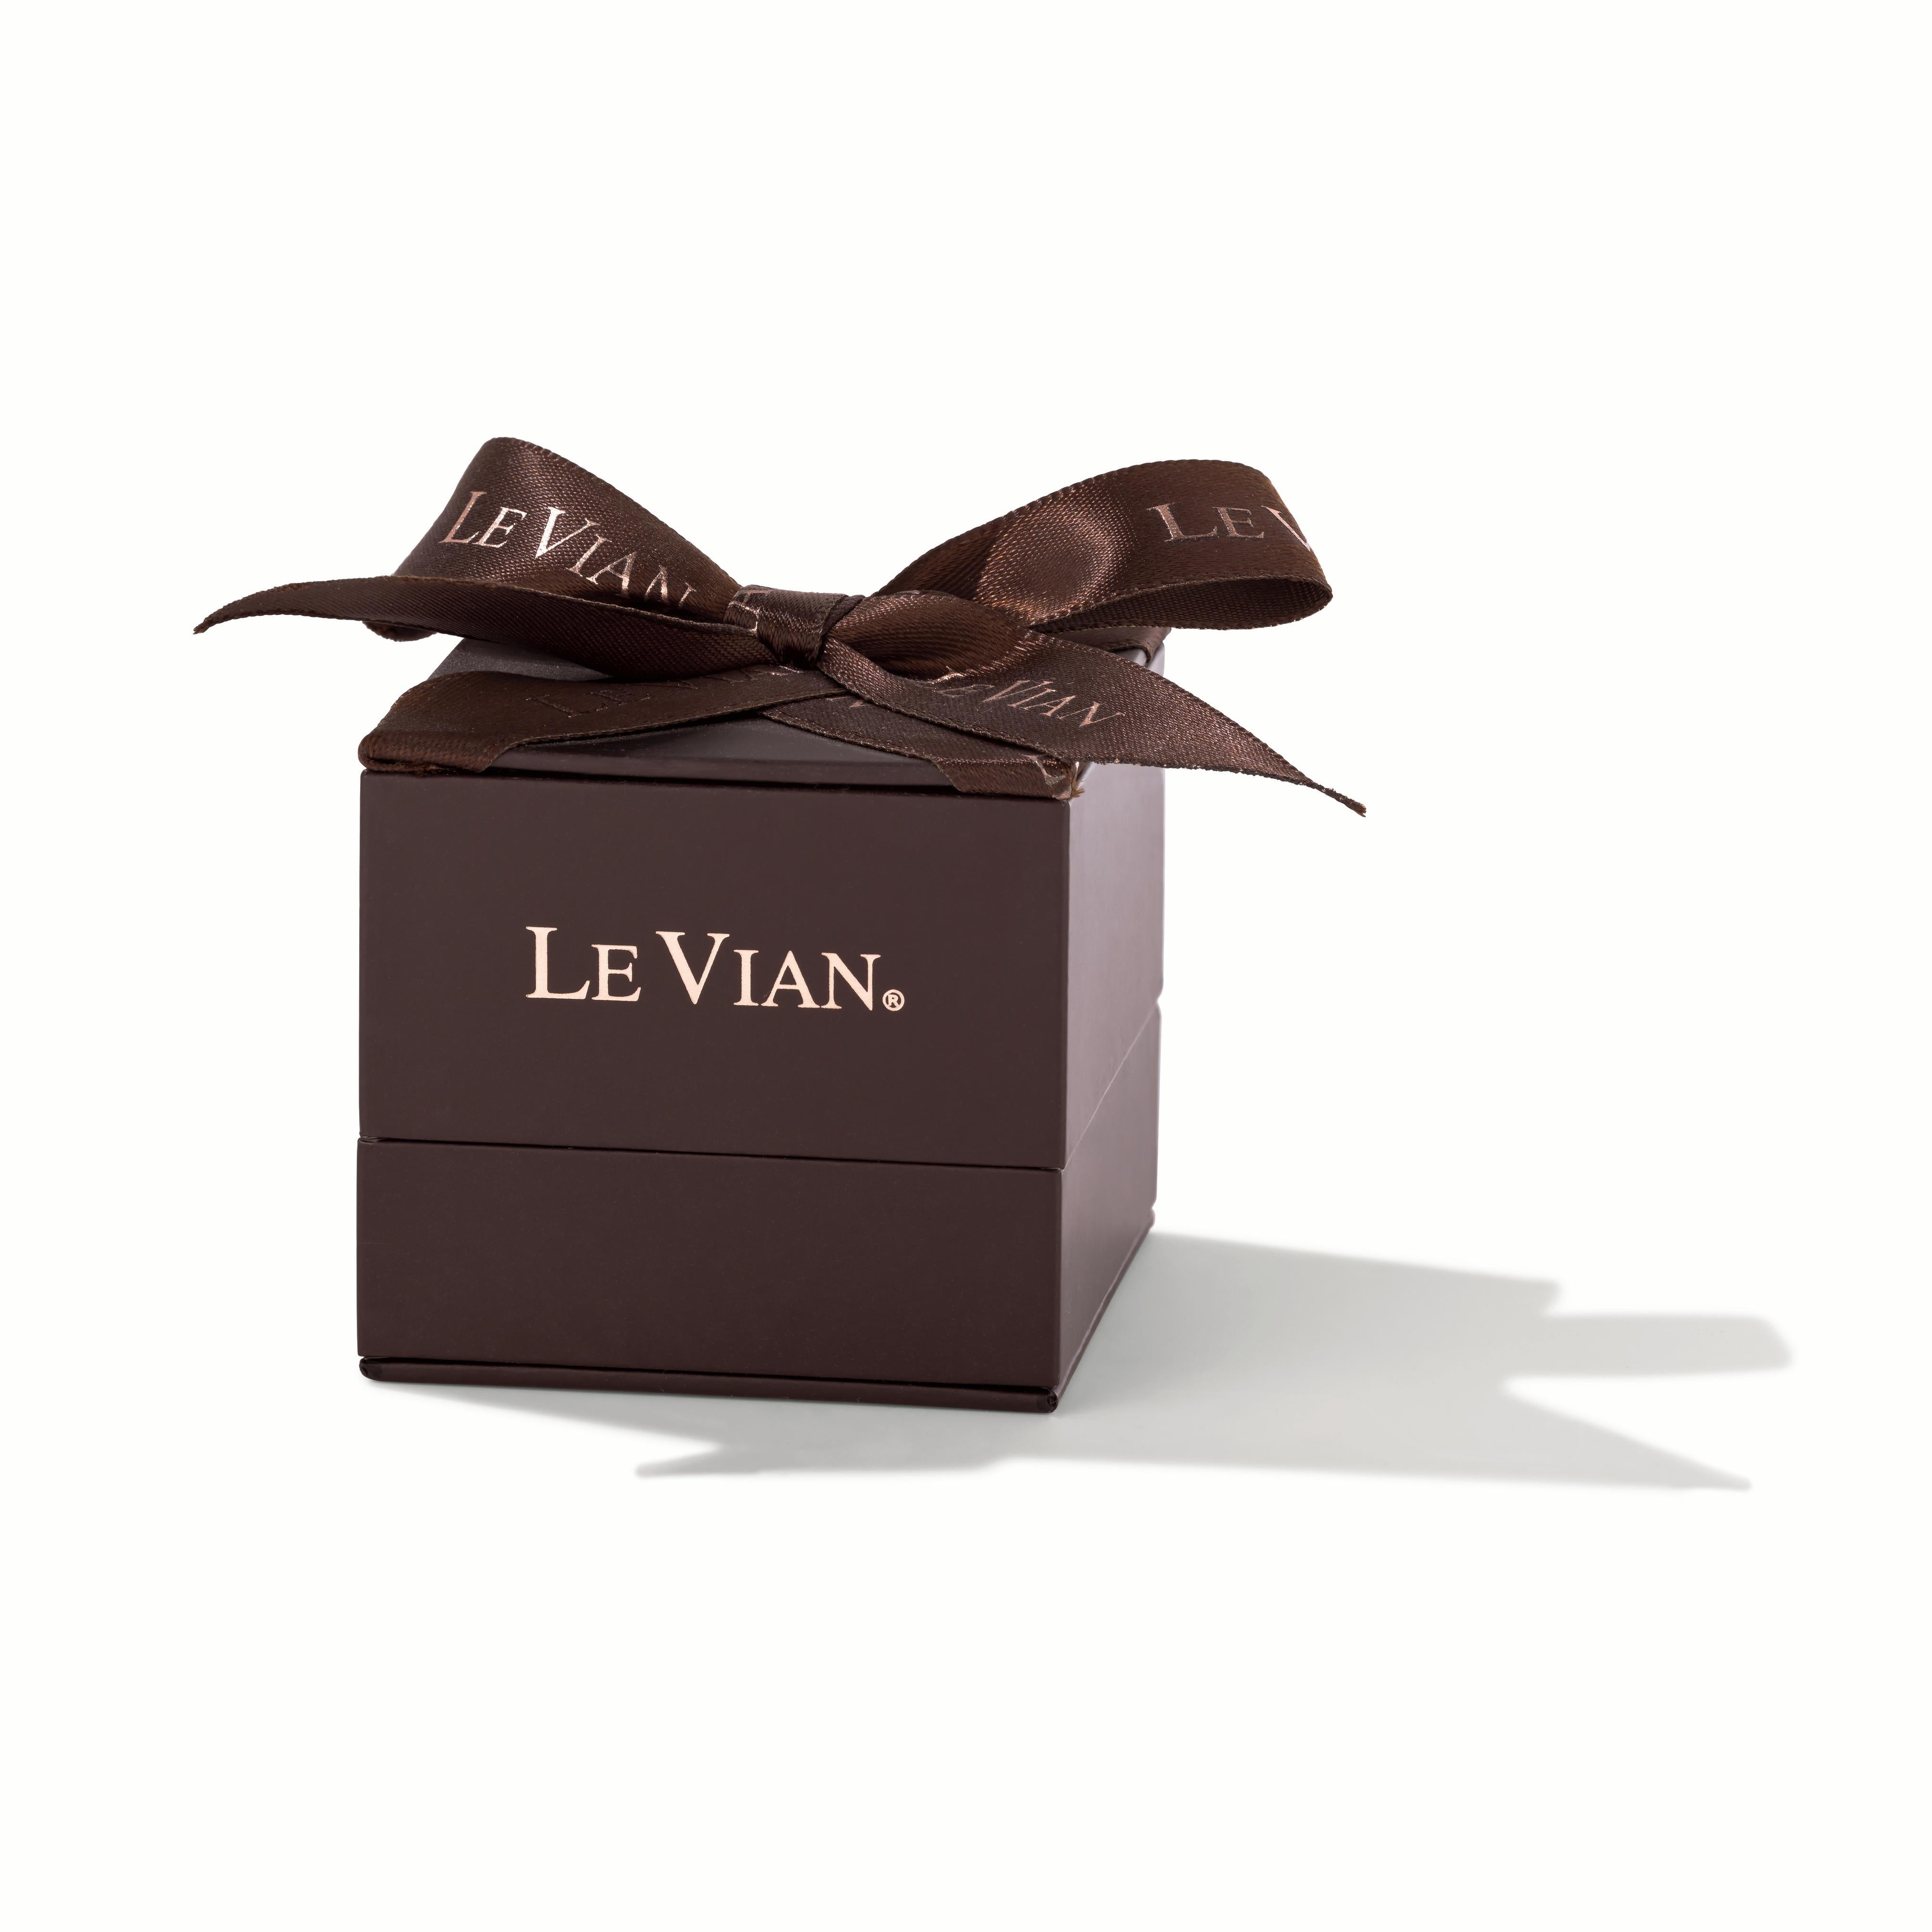 Le Vian Chocolatier® Earrings featuring cts. Chocolate Pearls®, 1/8 cts. Chocolate Diamonds®, Vanilla Diamonds® set in 14K Honey Gold™

Item comes with a Le Vian® jewelry box as well as a Le Vian® suede pouch!